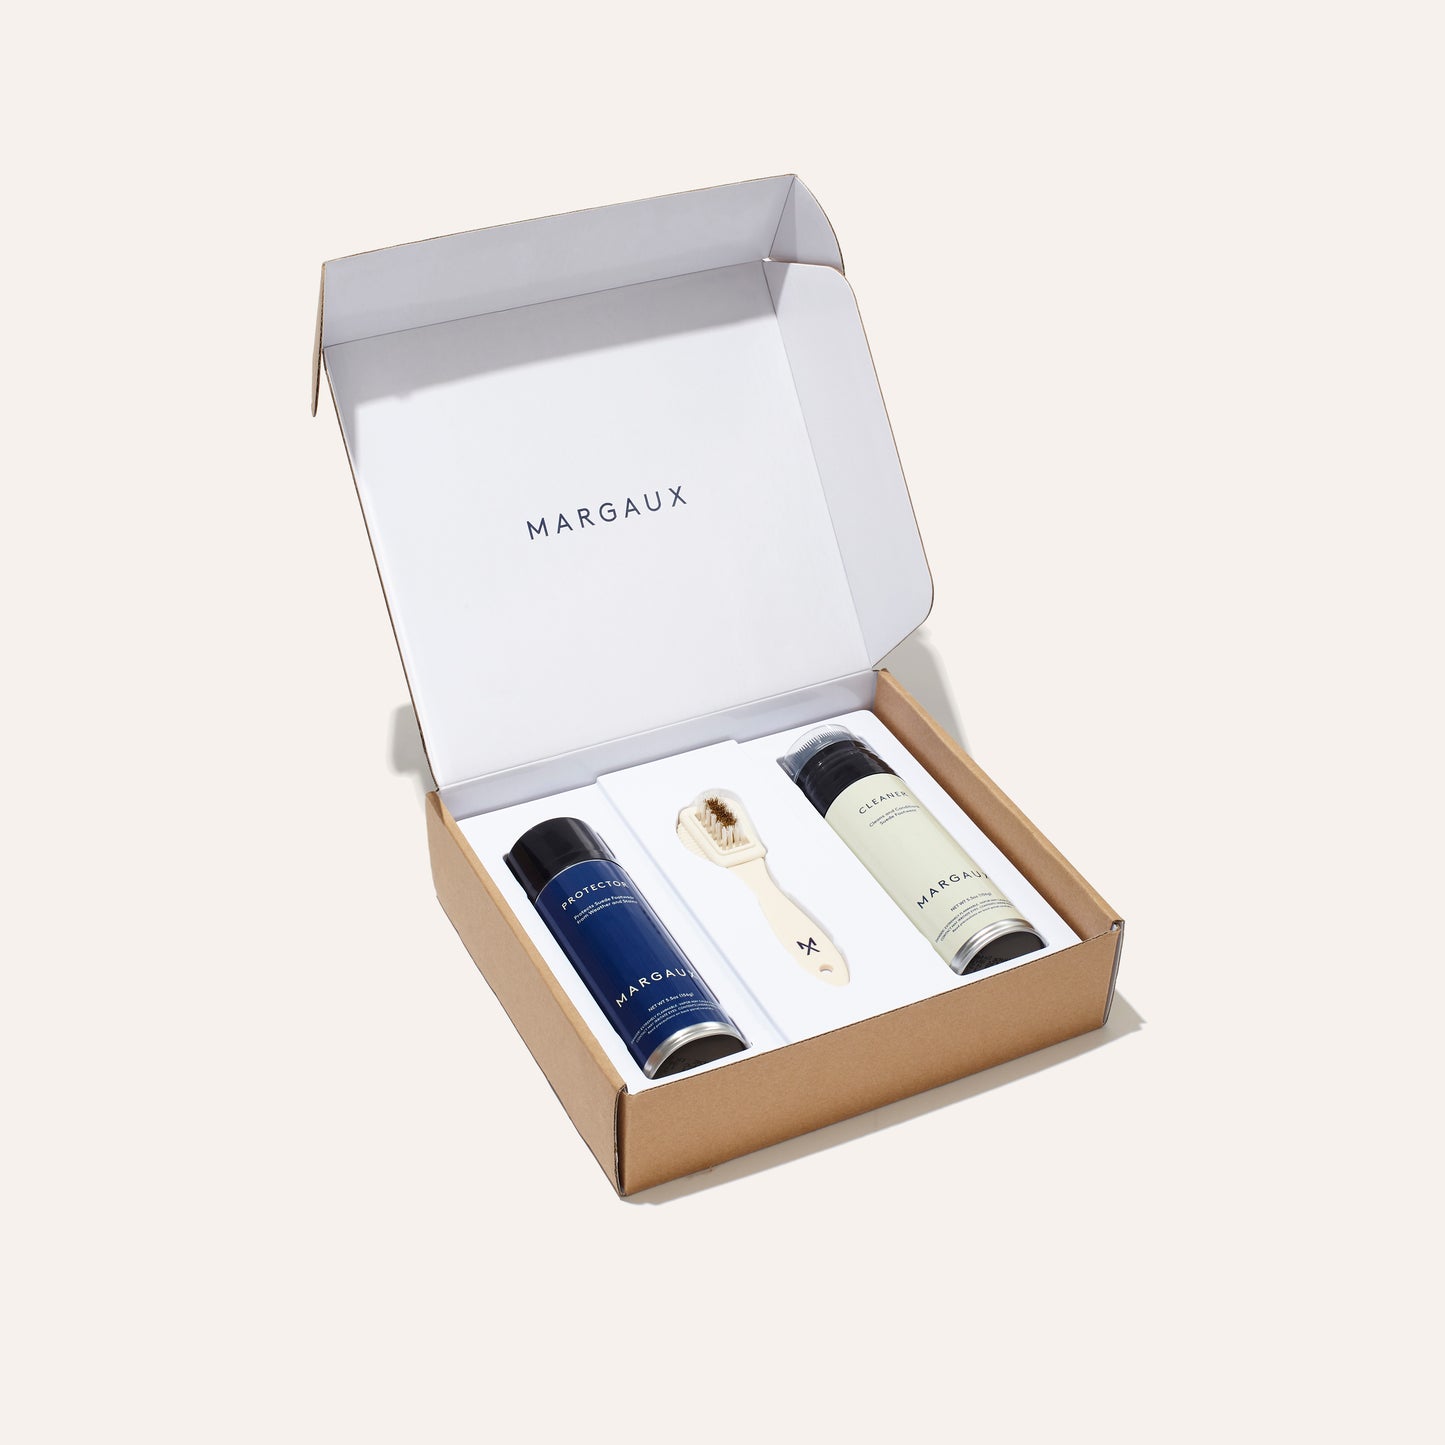 Suede care kit by Margaux with a suede brush, cleaning spray, and protectant